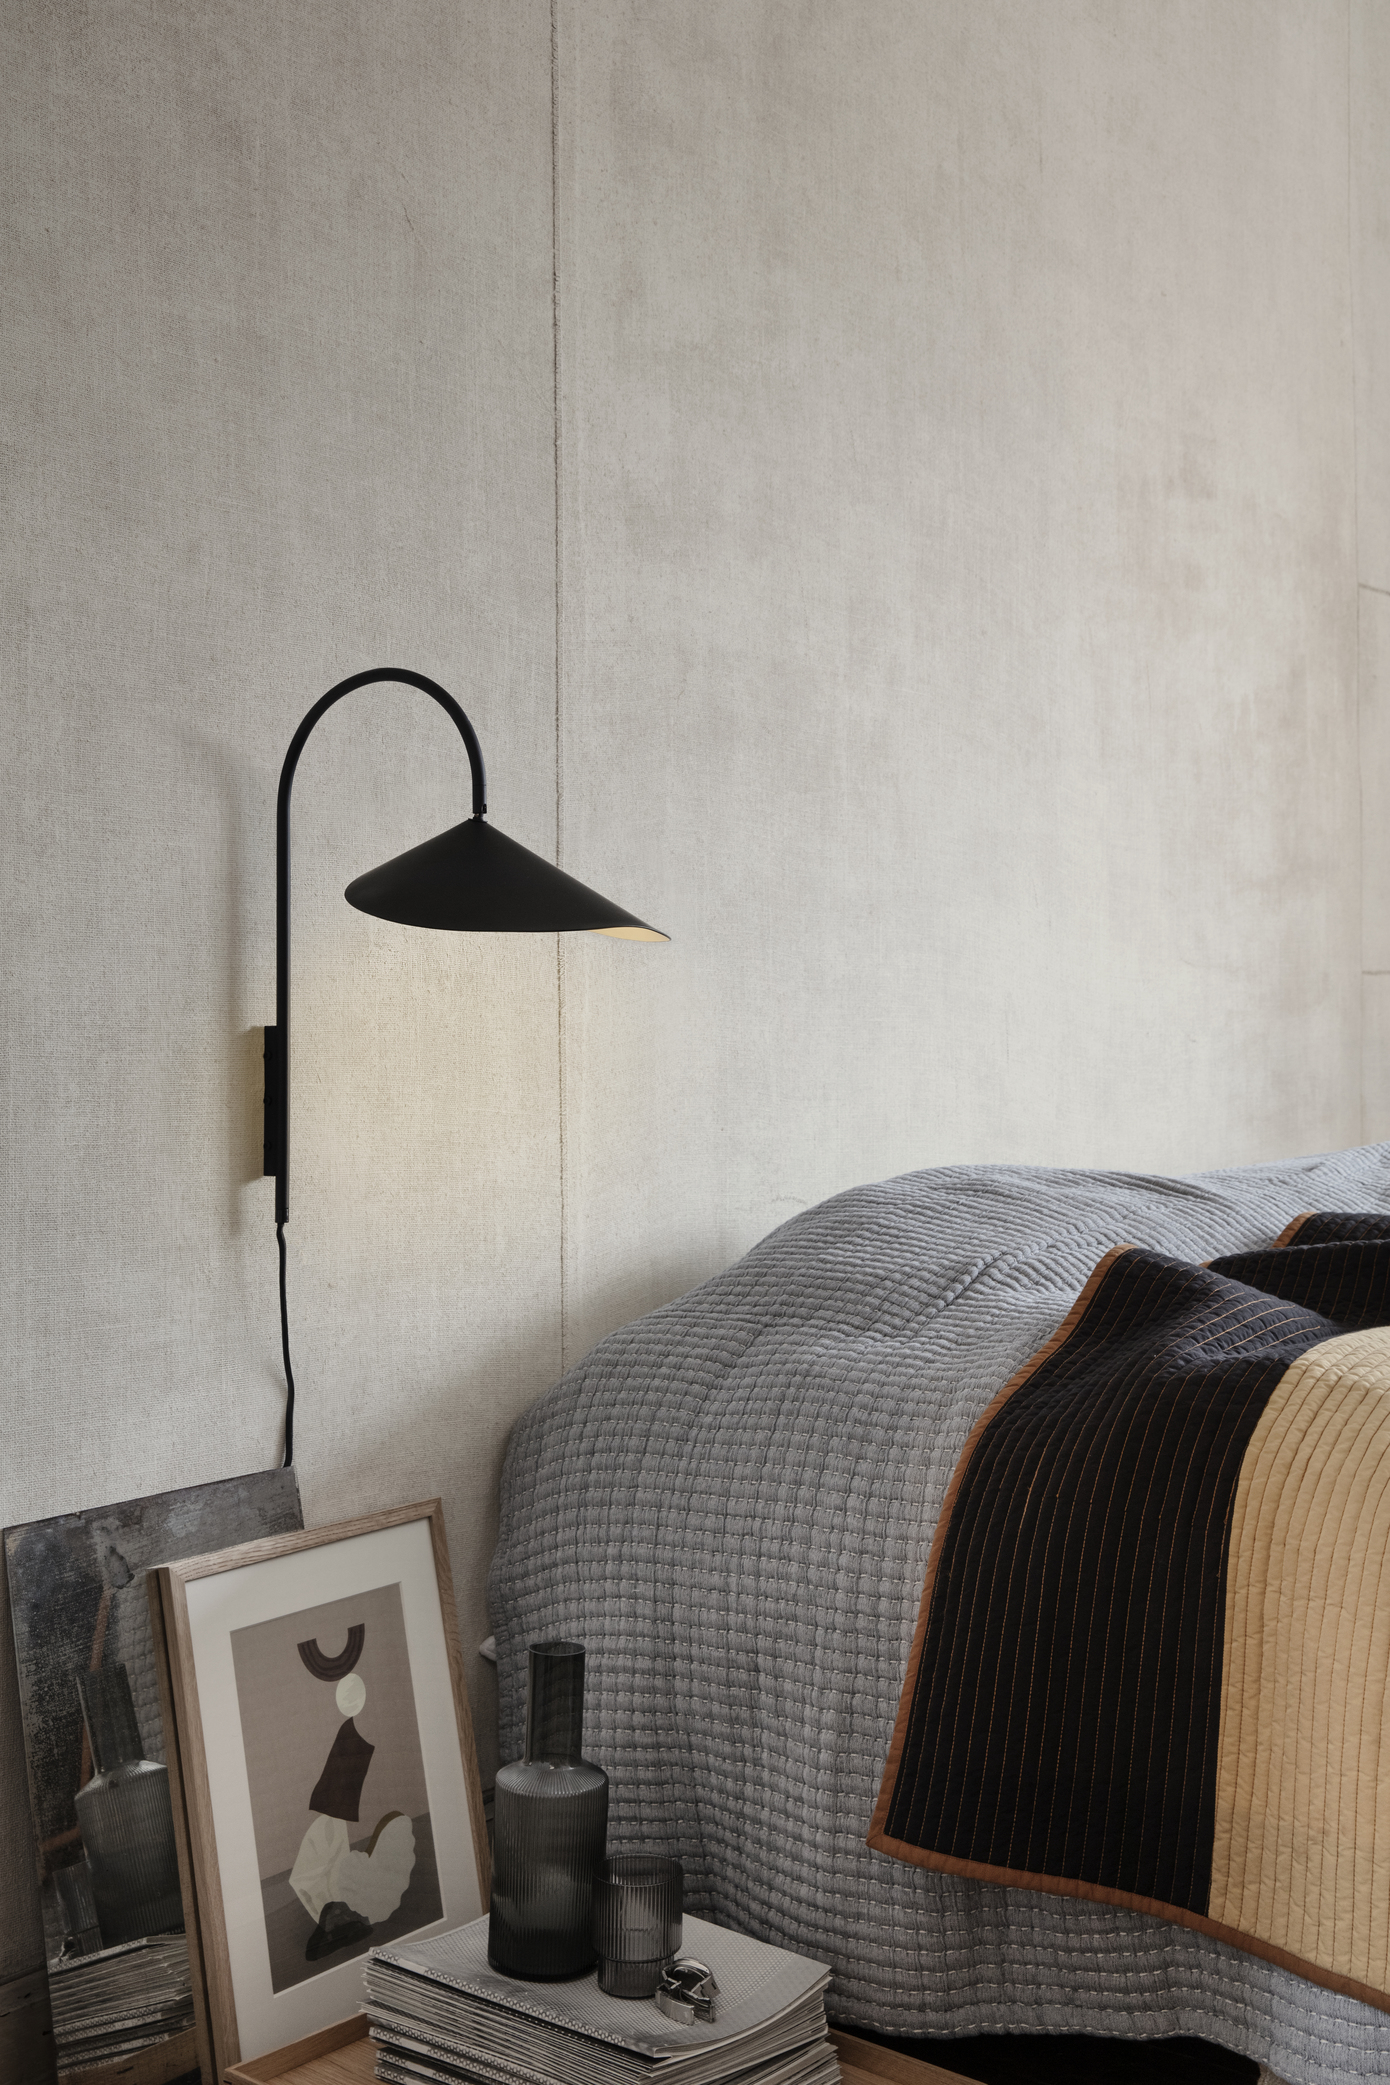 Ferm Living S/S19 collection 